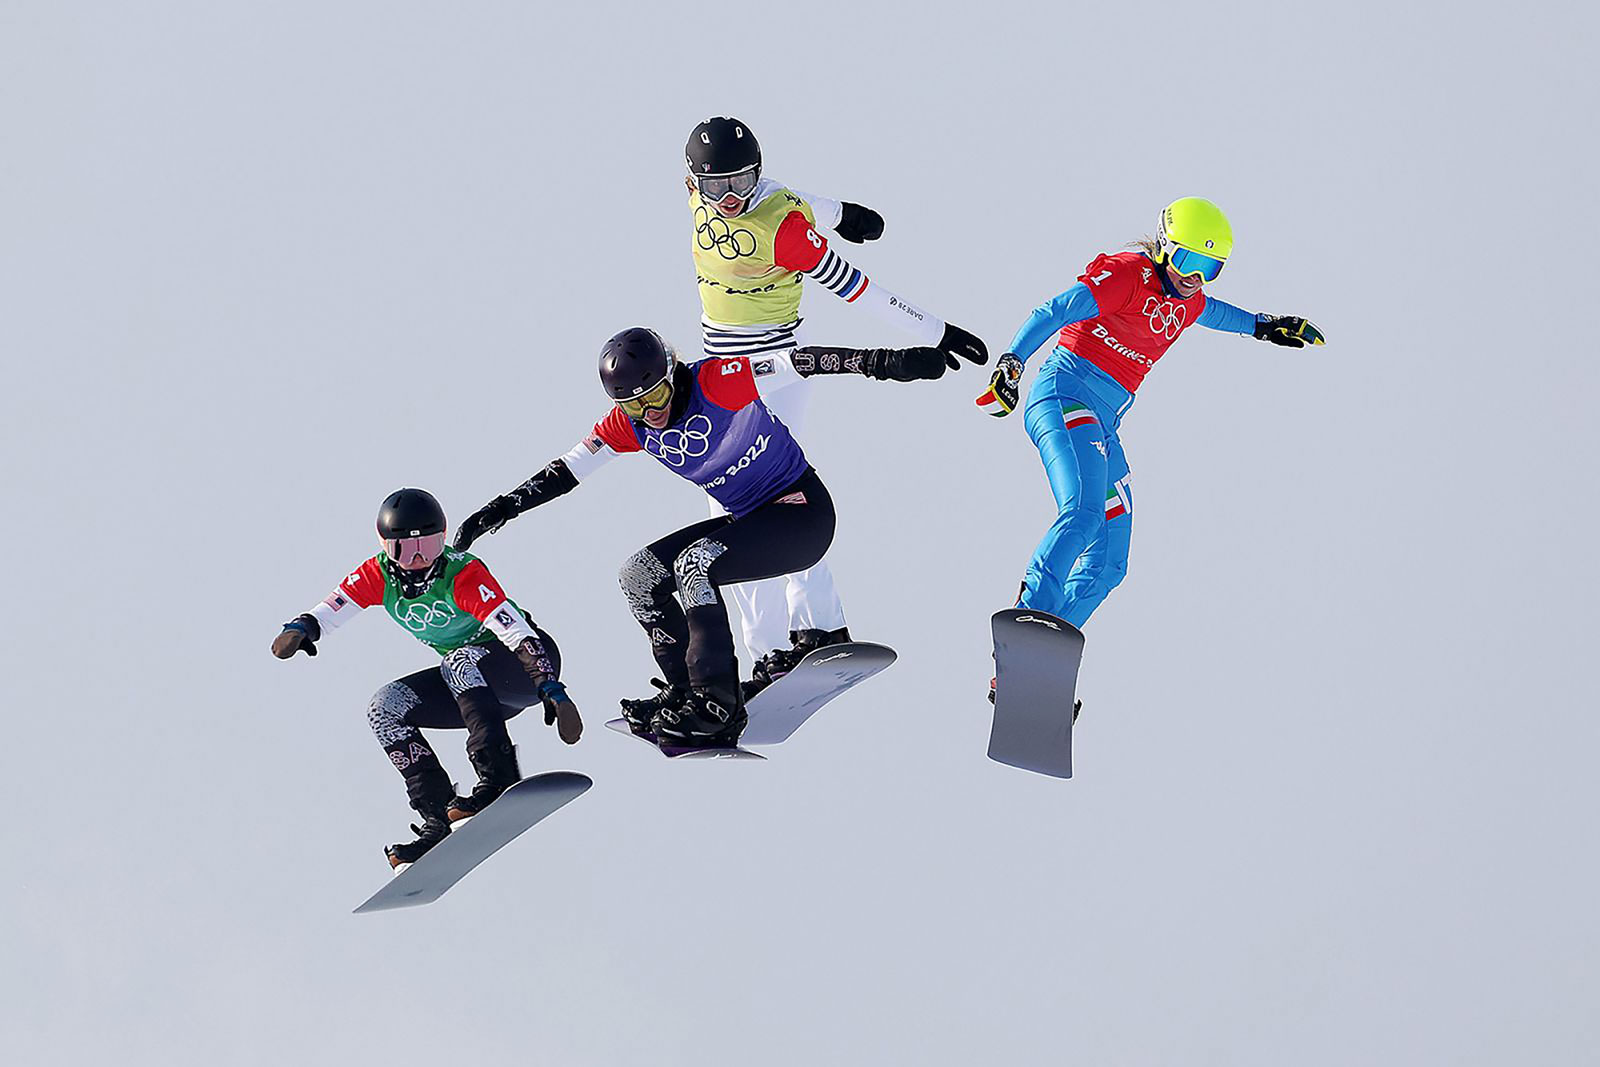 From left, the United States' Stacy Gaskill, the United States' Lindsey Jacobellis, France's Chloe Trespeuch and Italy's Michela Moioli compete in a snowboard cross semifinal on February 9. Jacobellis would go on to win the event, her first gold medal in her fifth Olympic Games.